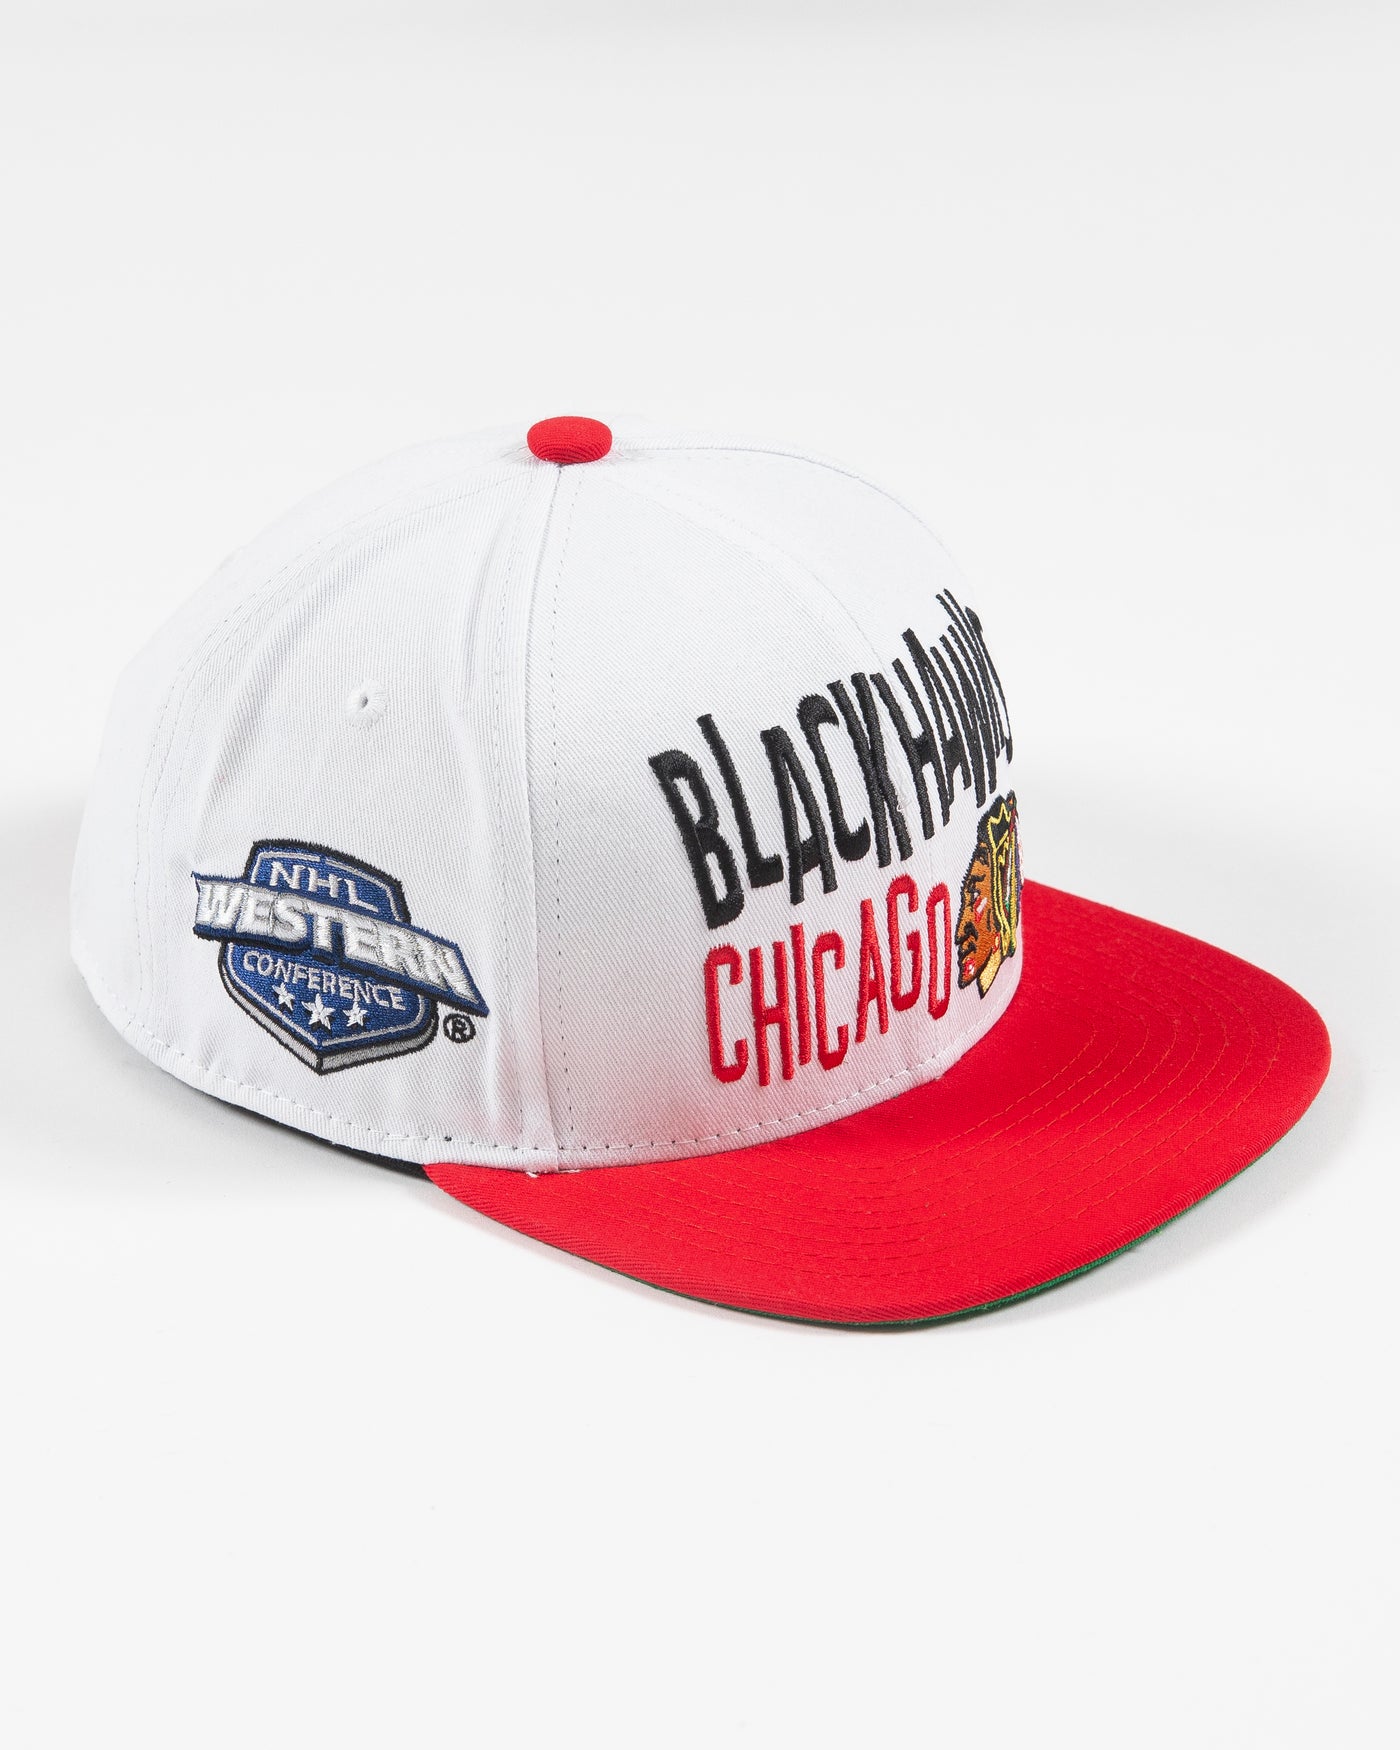 white and red Mitchell & Ness youth snapback with Chicago Blackhawks wordmark and primary logo embroidered on front - right angle lay flat